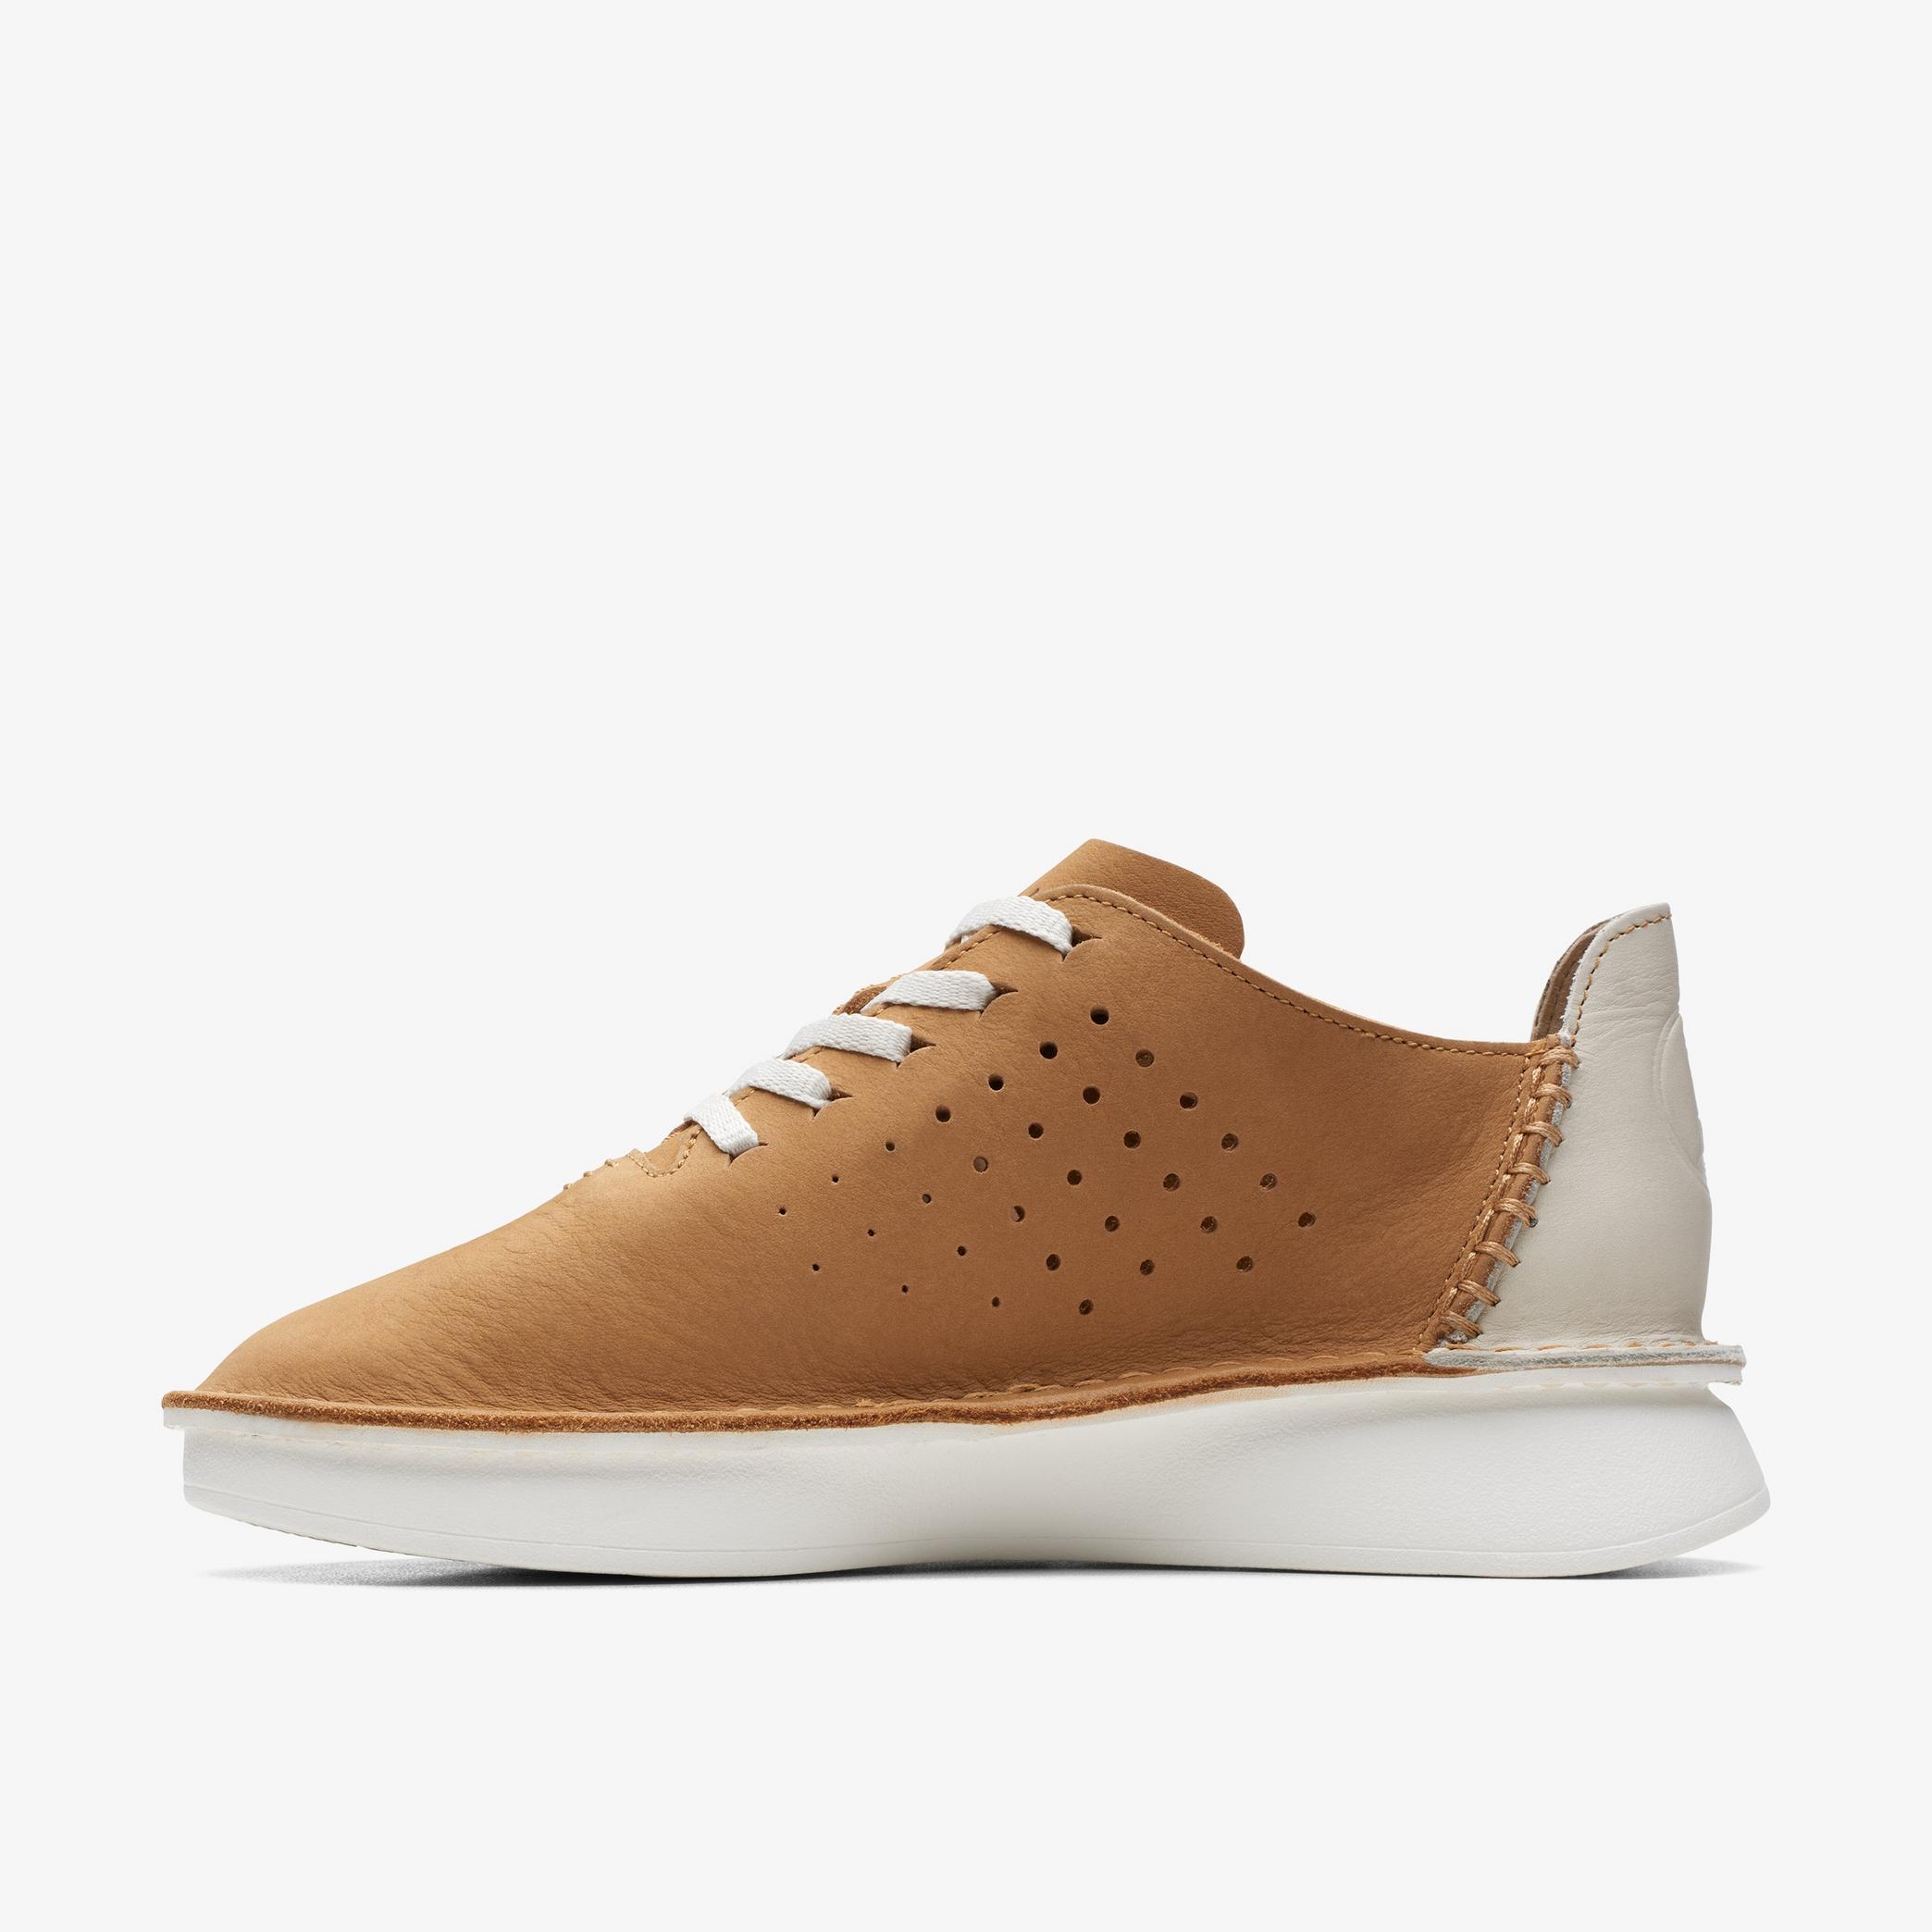 Velhill Etch Light Tan Combination Sneakers, view 2 of 6